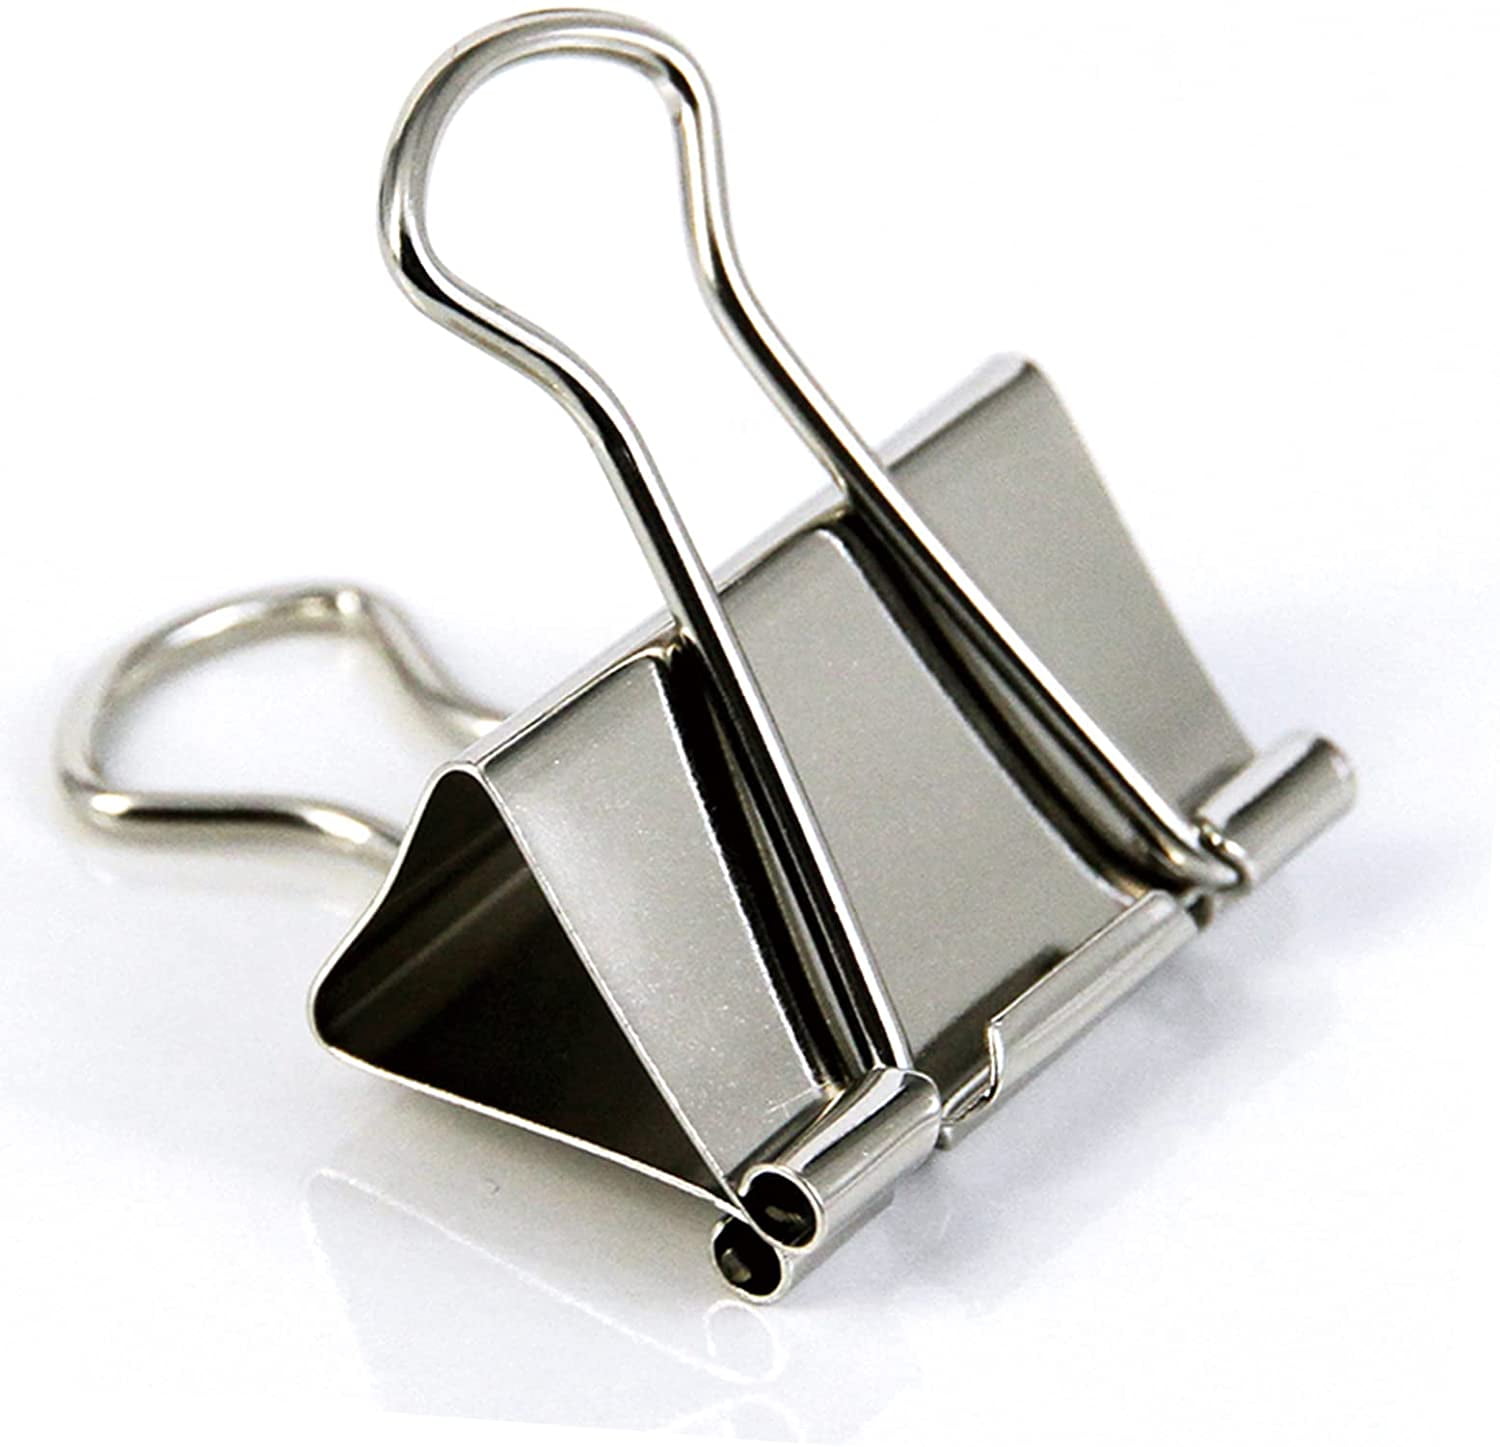 Paper Notebook Report Clamps New Box of 12 Hardened Steel 2" Large Binder Clips 